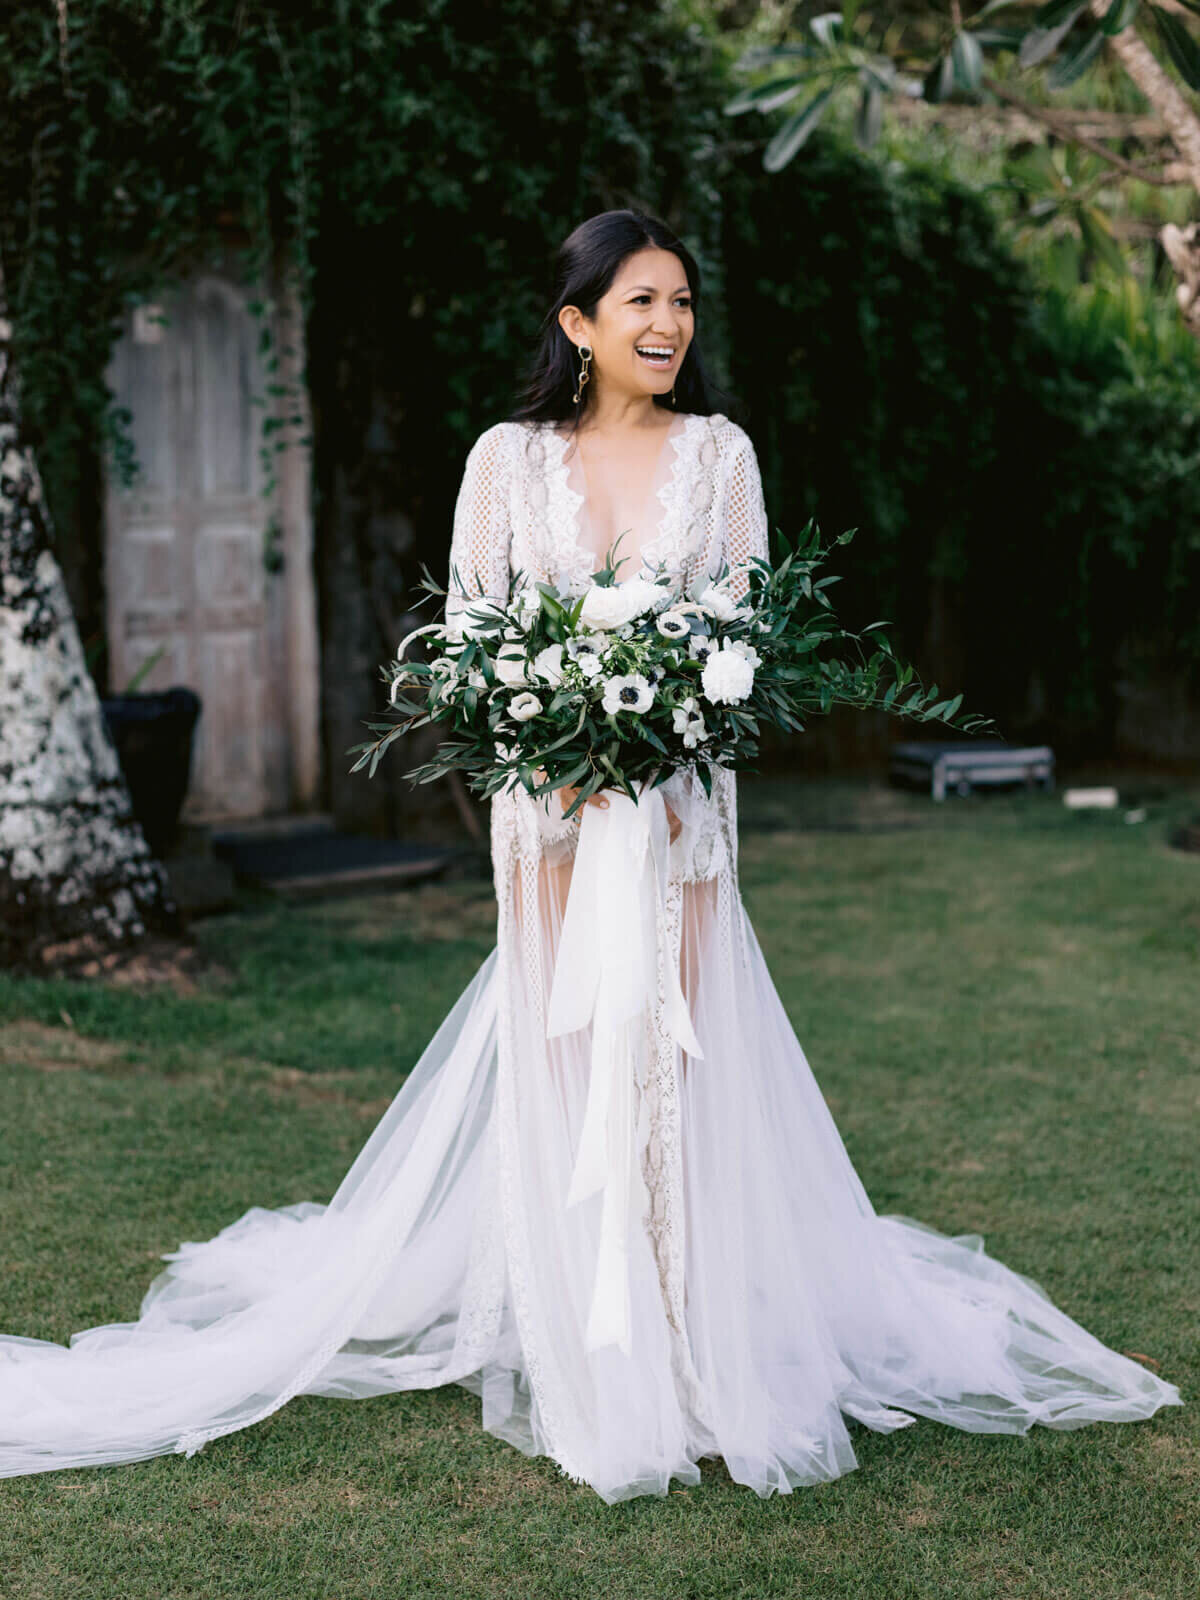 The gorgeous bride is smiling and holding her flower bouquet in Khayangan Estate, Bali, Indonesia. Image by Jenny Fu Studio